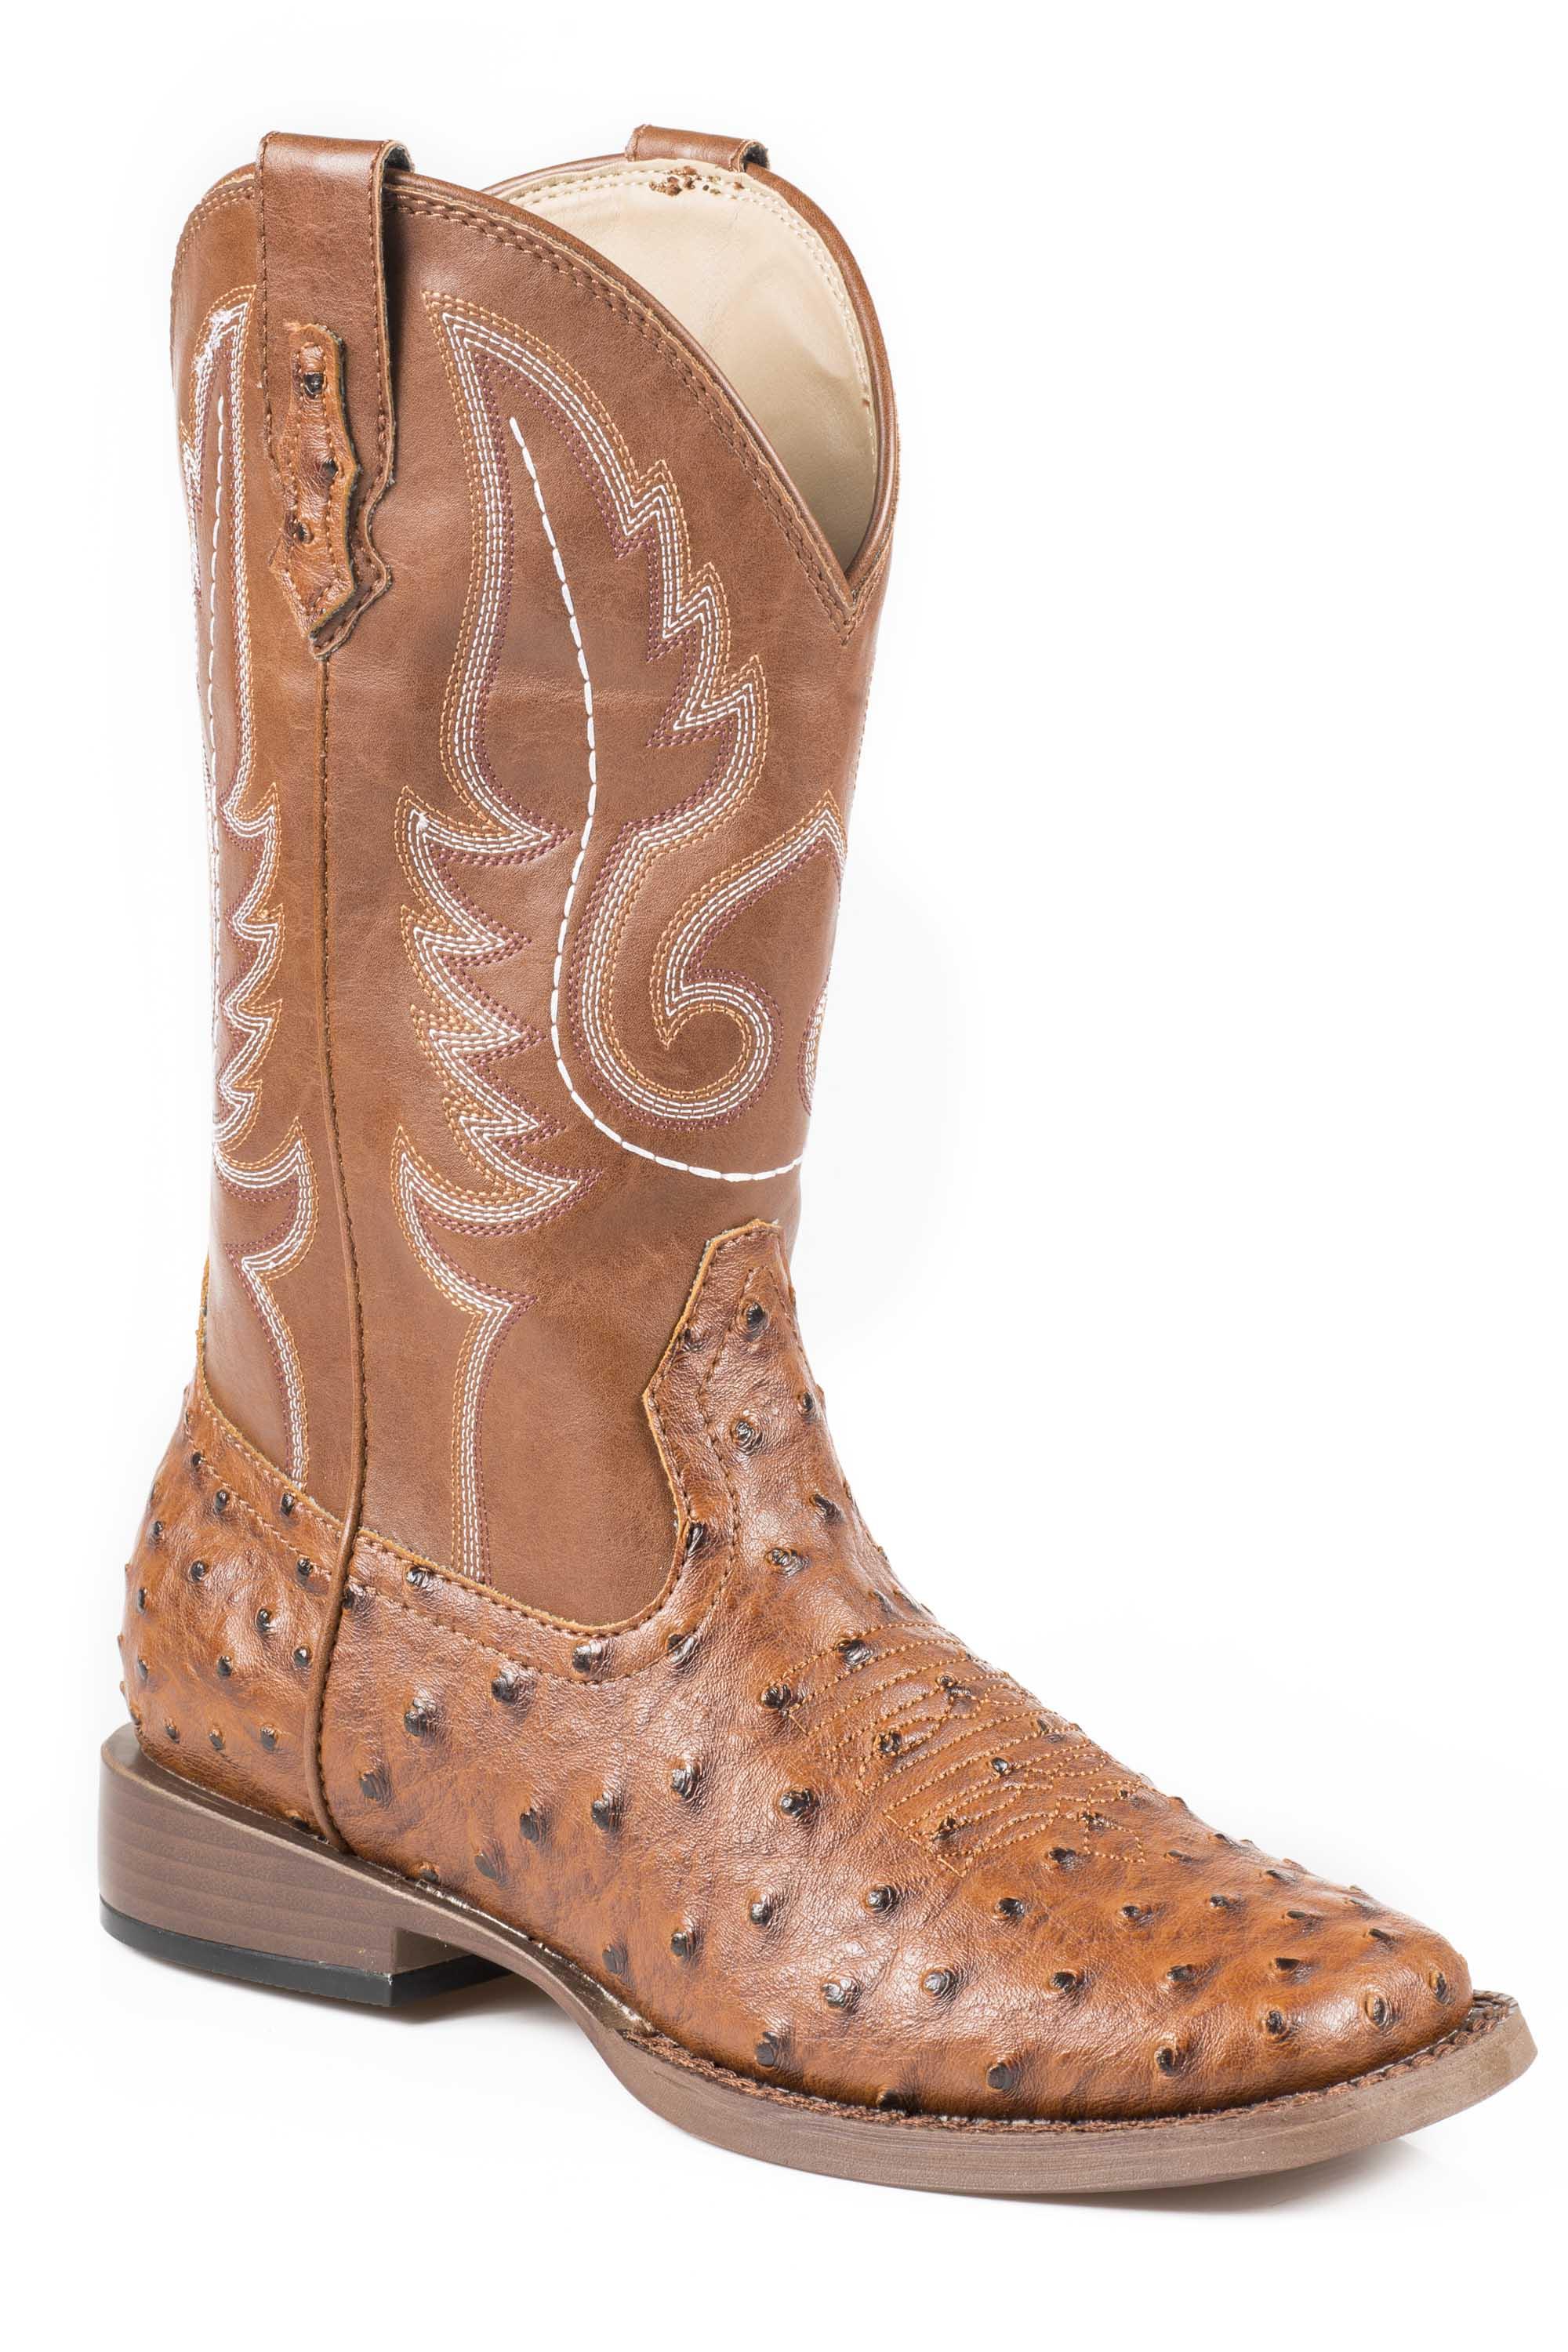 ROPER WOMENS COWBOY BOOT FAUX LEATHER TAN UPPER WITH OSTRICH PRINT VAMP - Flyclothing LLC